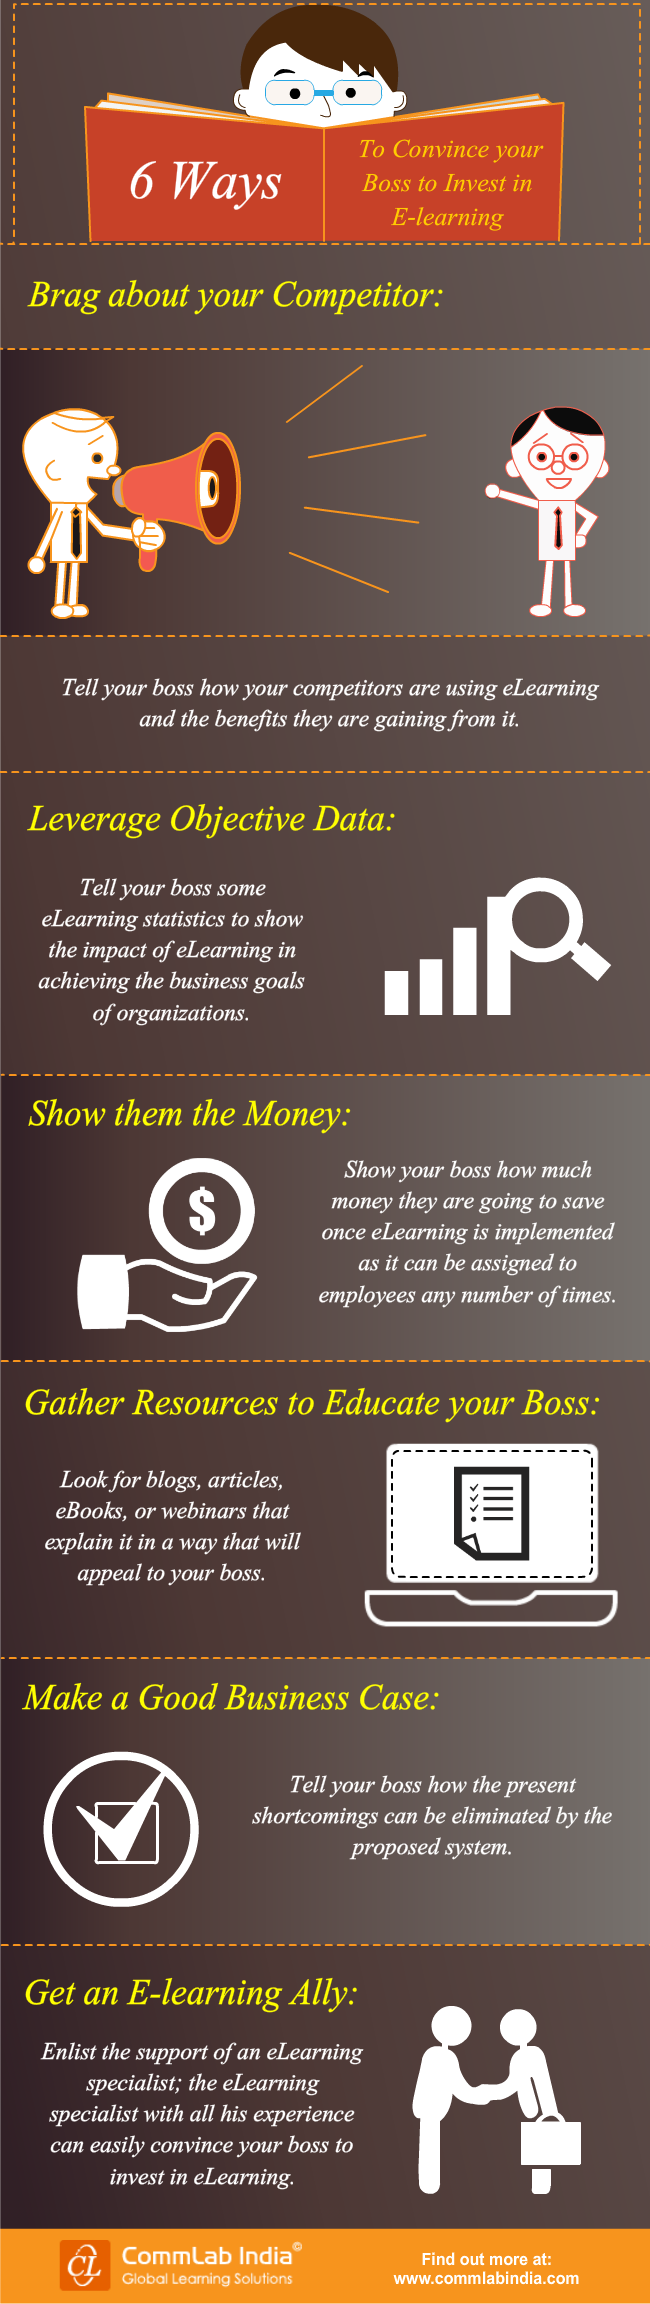 6 Ways to Convince Your Boss to Invest in E-learning [Infographic]